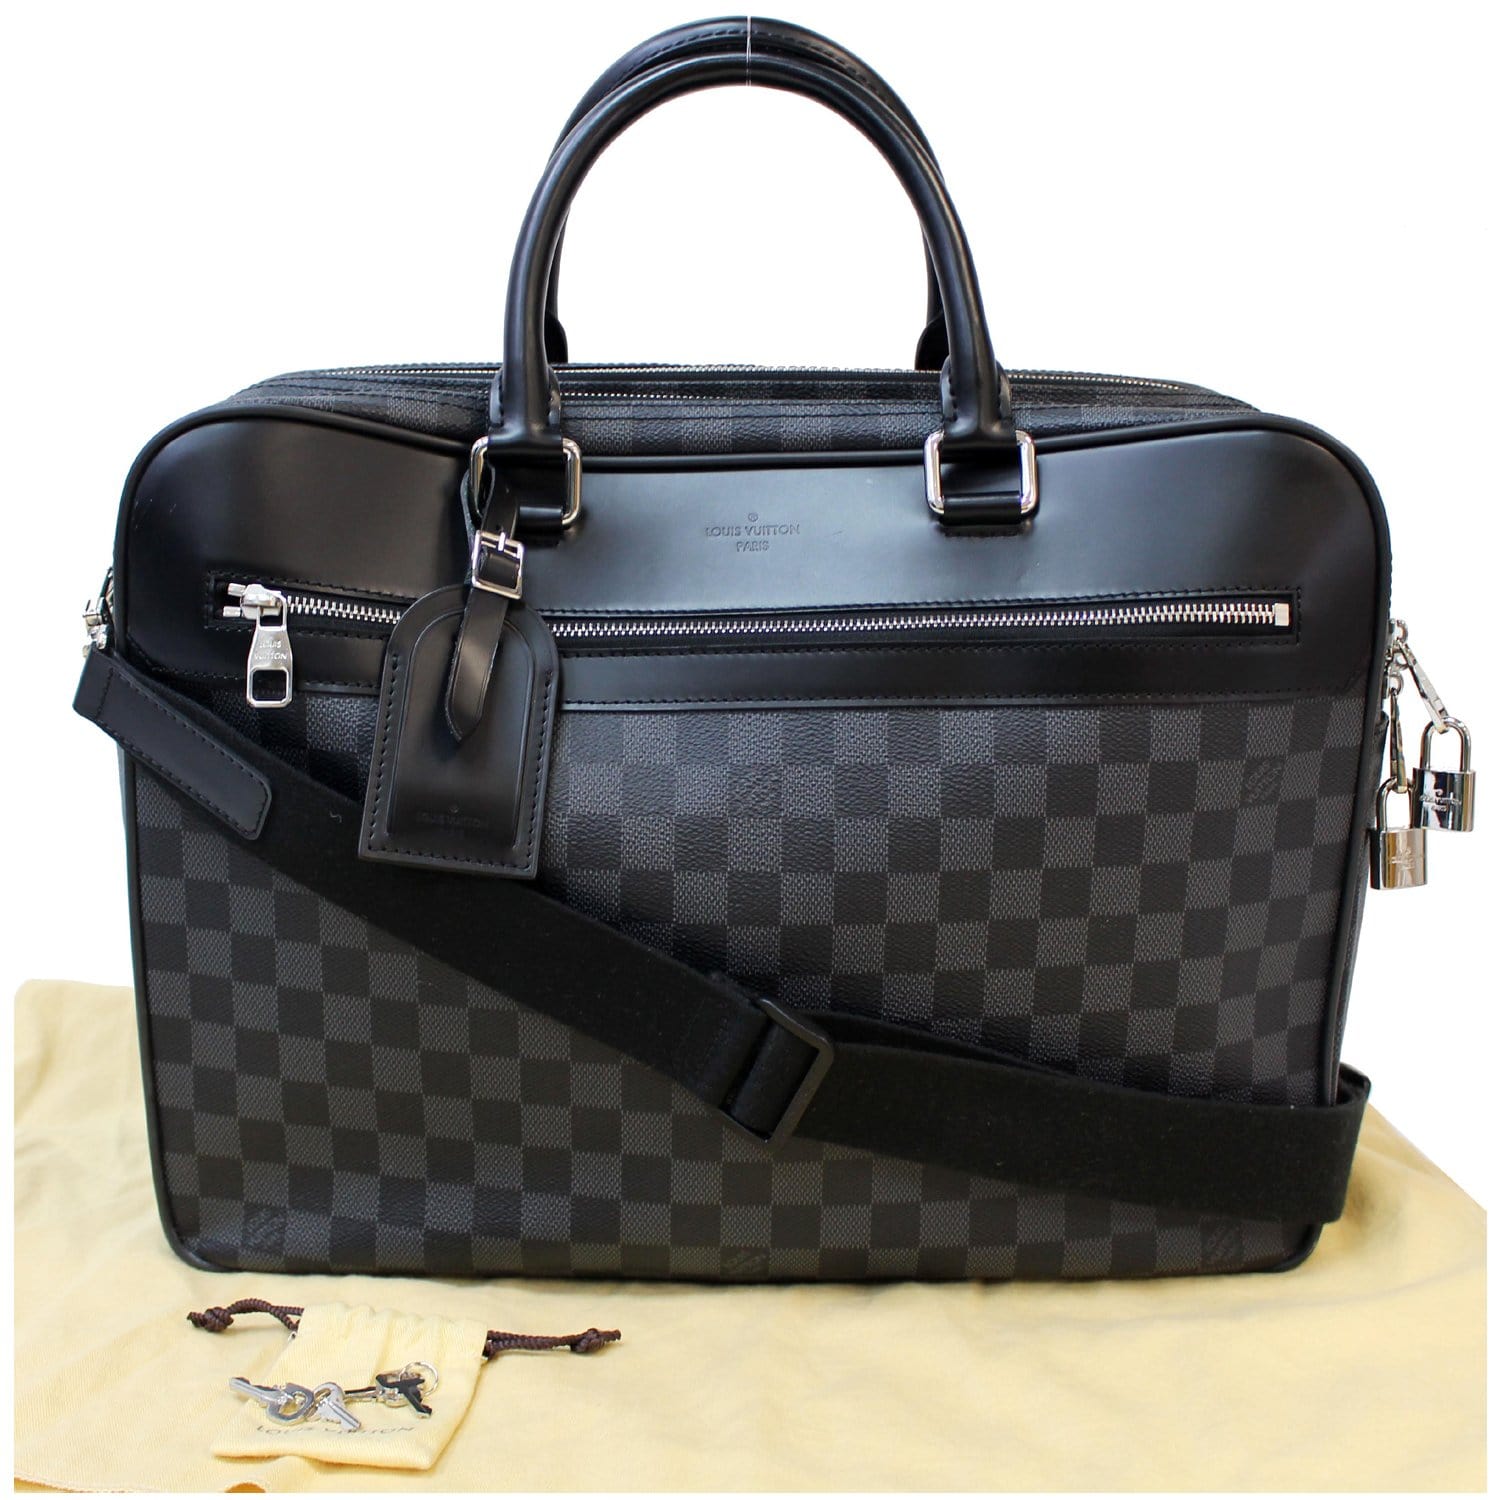 LOUIS VUITTON GRIP OVERNIGHT LIMITED EDITION BAG